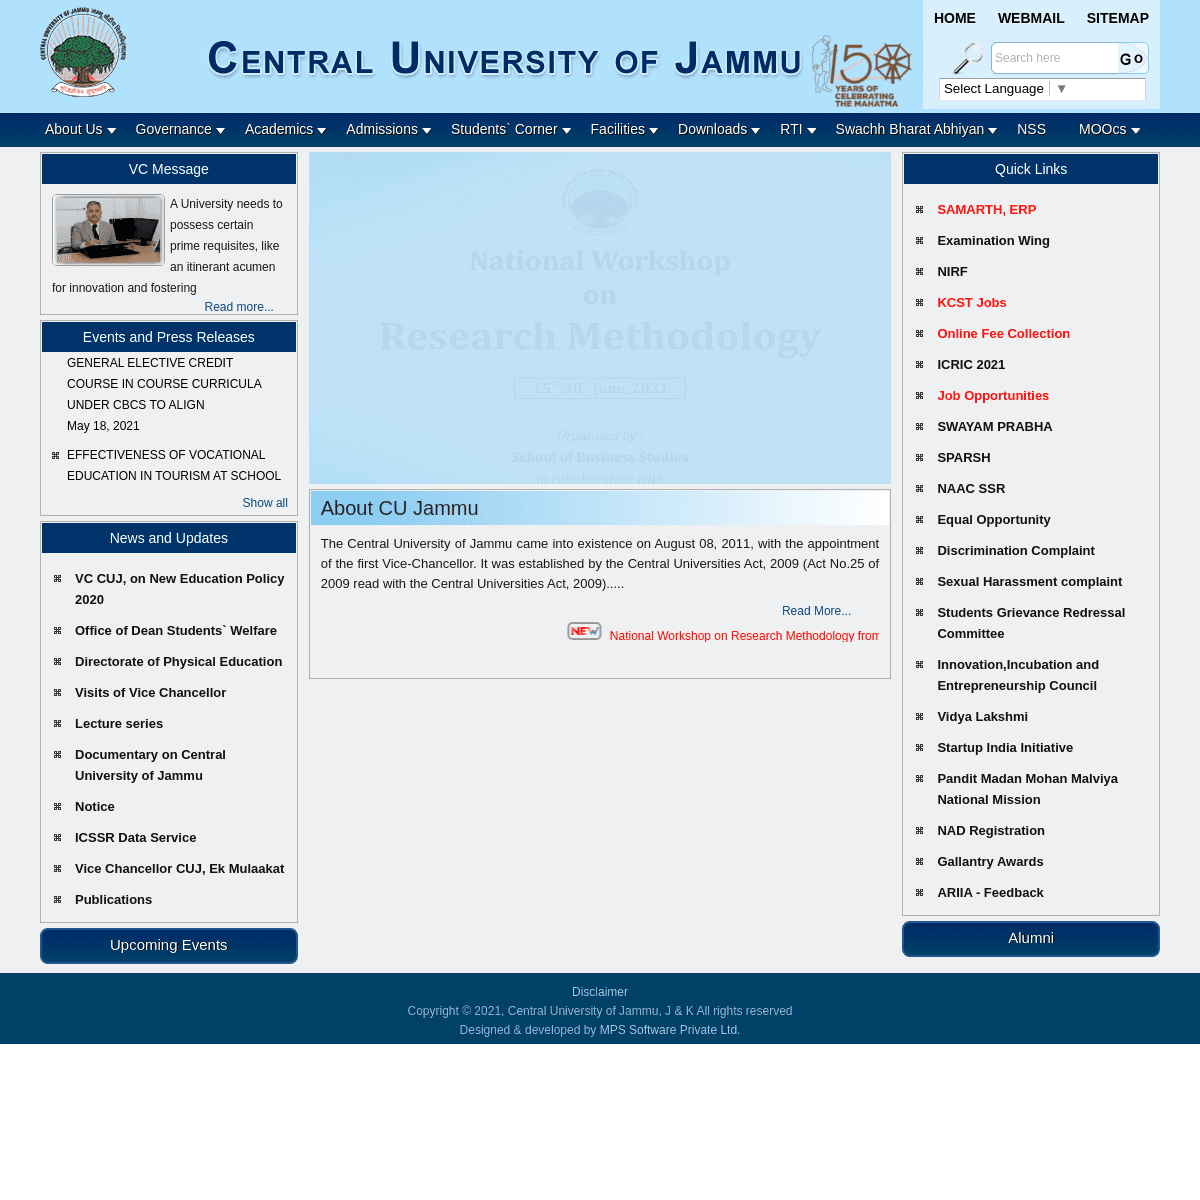 A complete backup of https://cujammu.ac.in